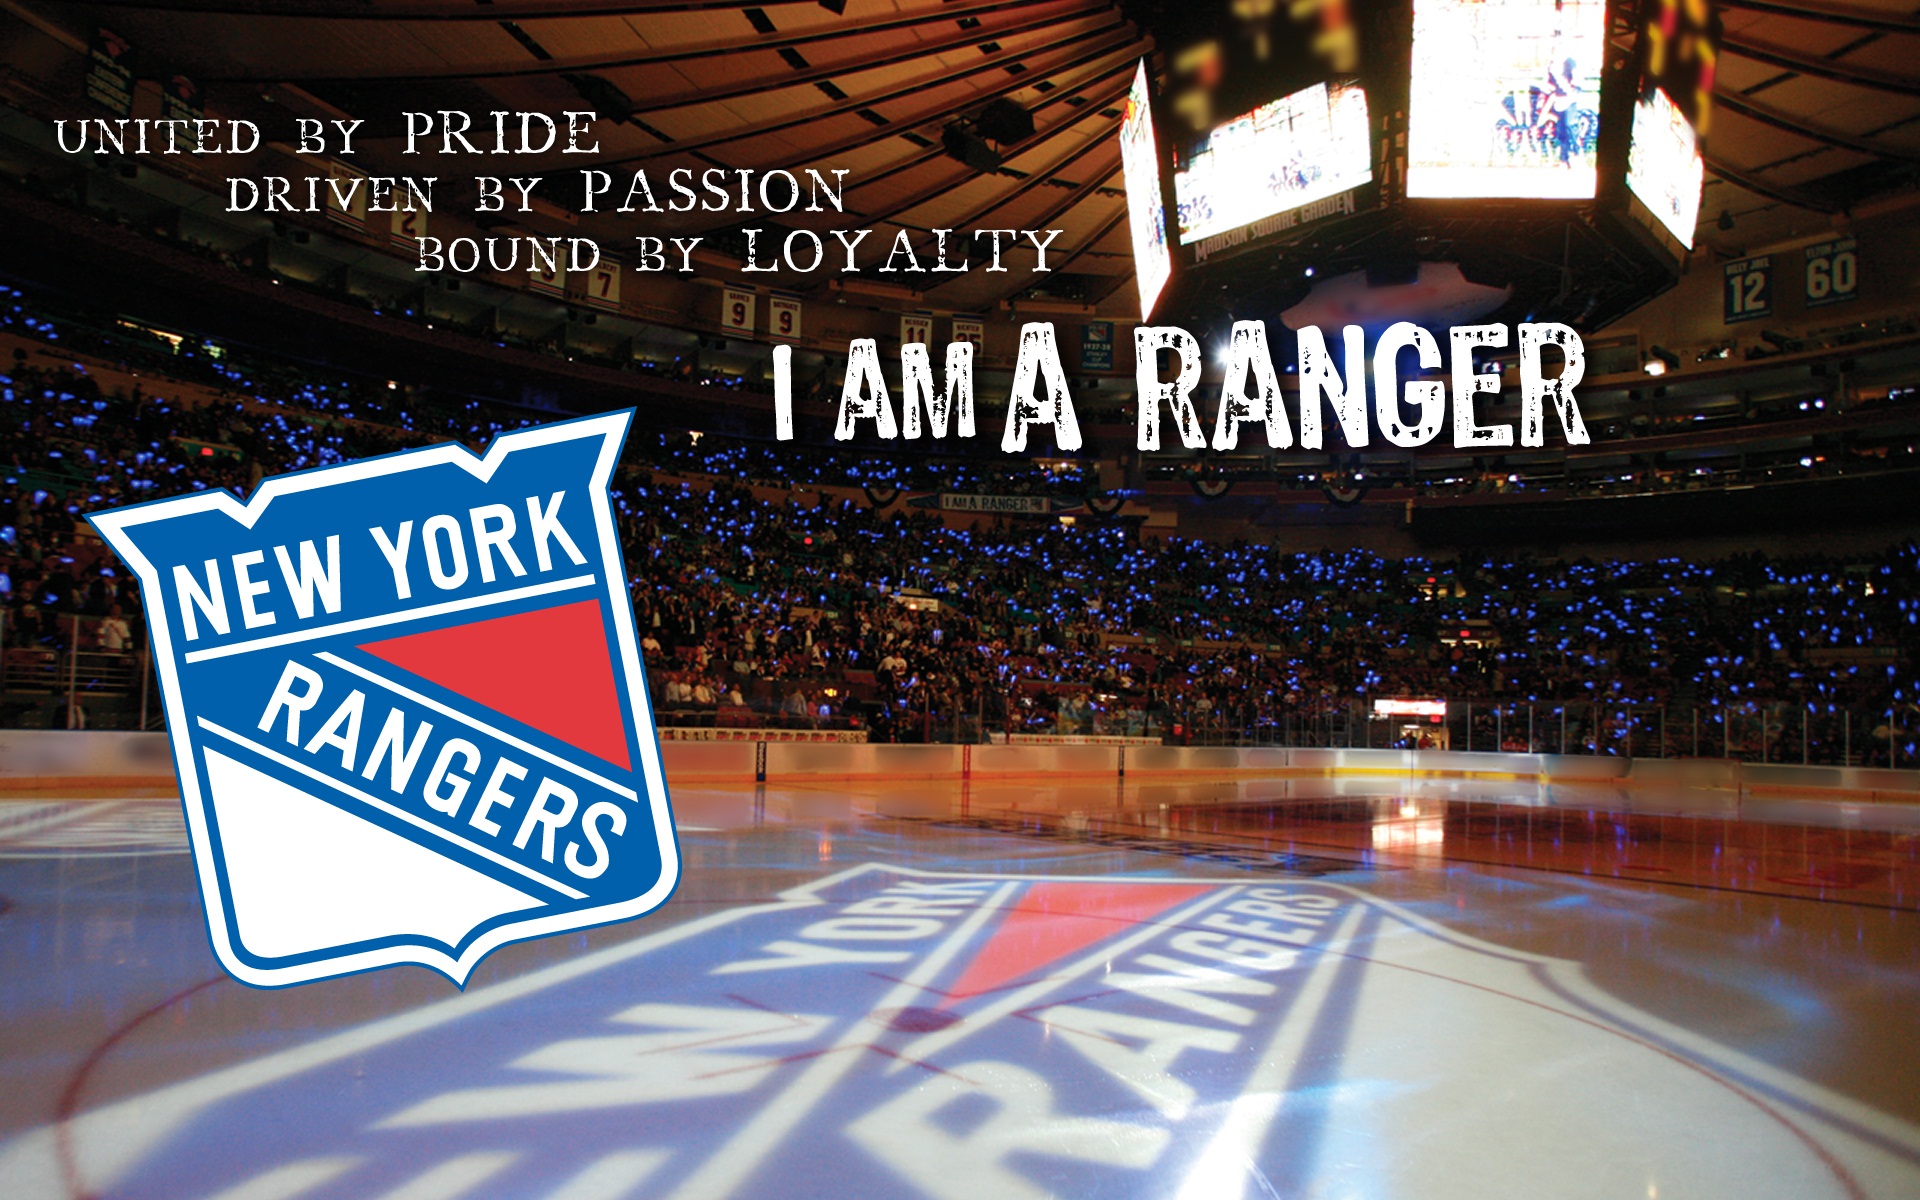 78 Best images about New York Rangers on Pinterest | Legends